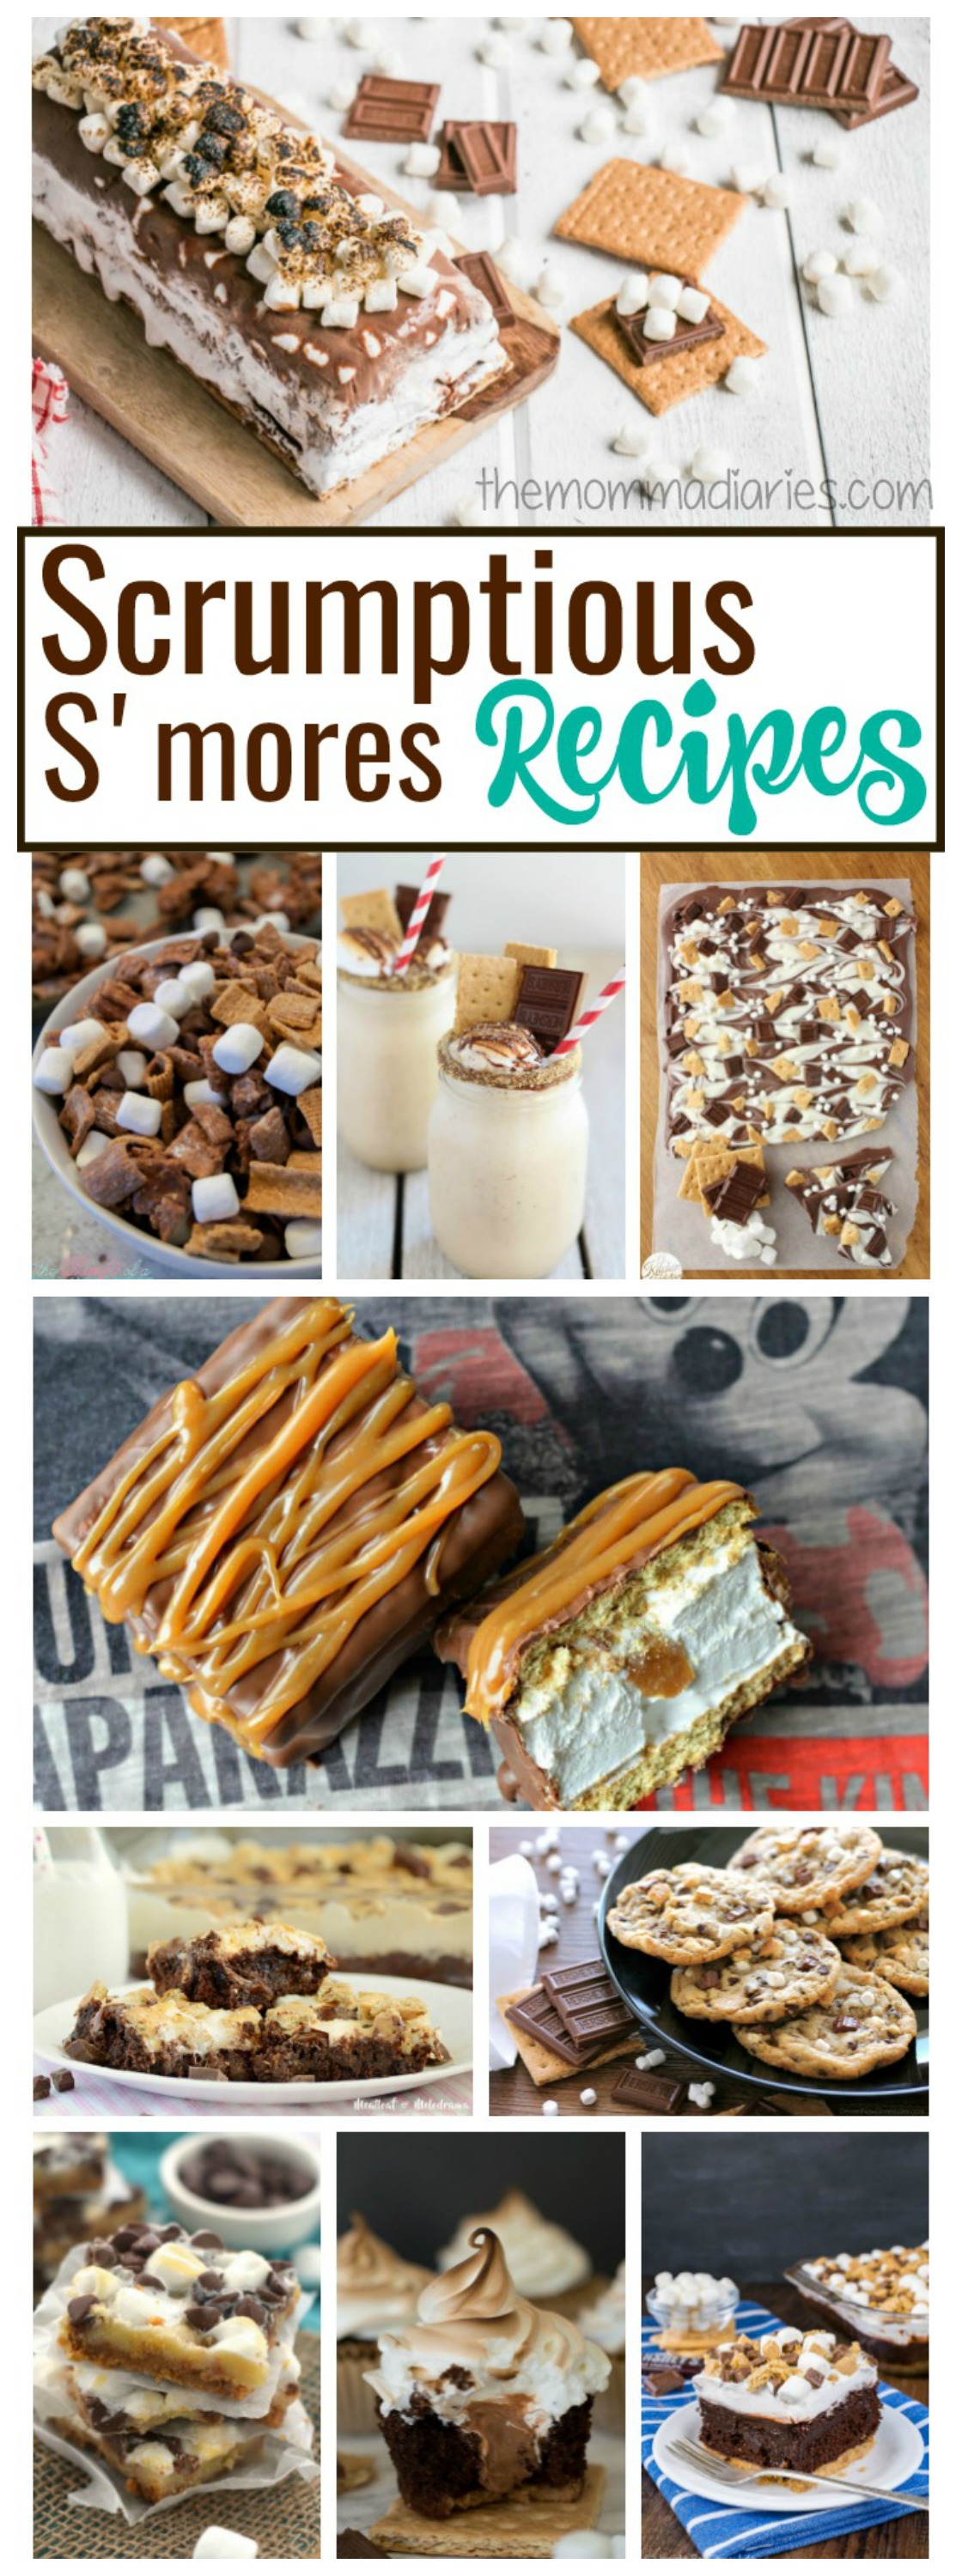 S'mores Recipes, national S'mores Day, S'mores